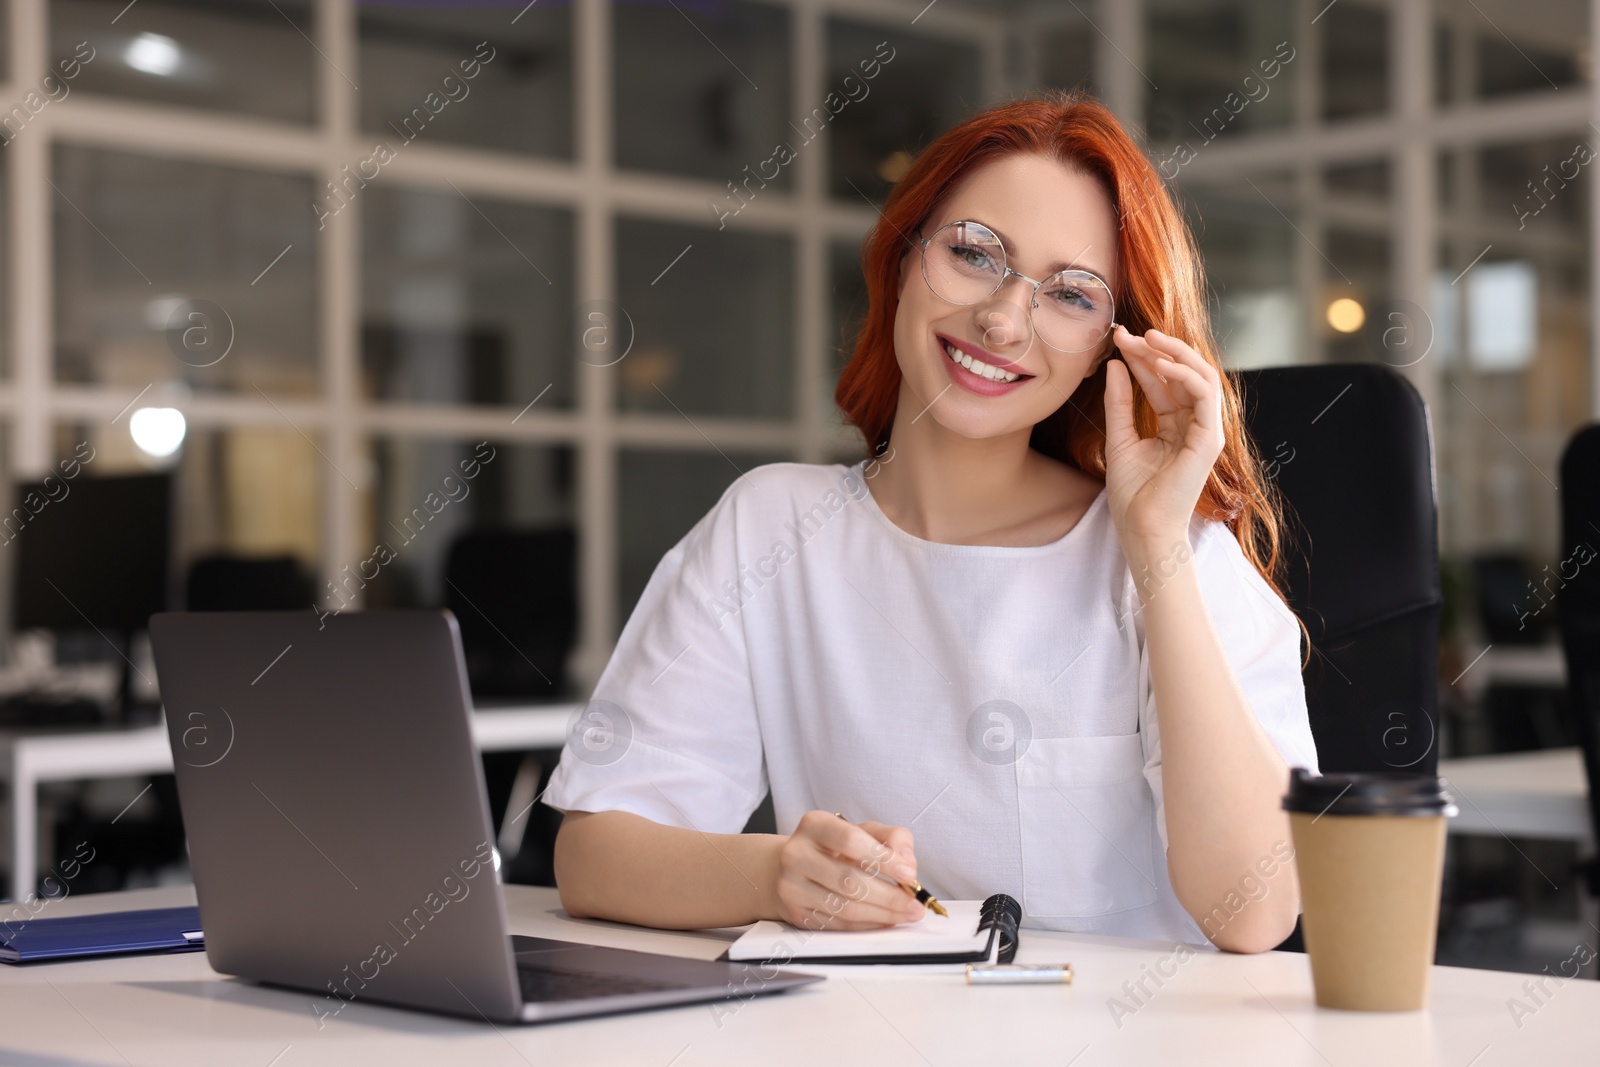 Photo of Happy woman taking notes while working with laptop at white desk in office